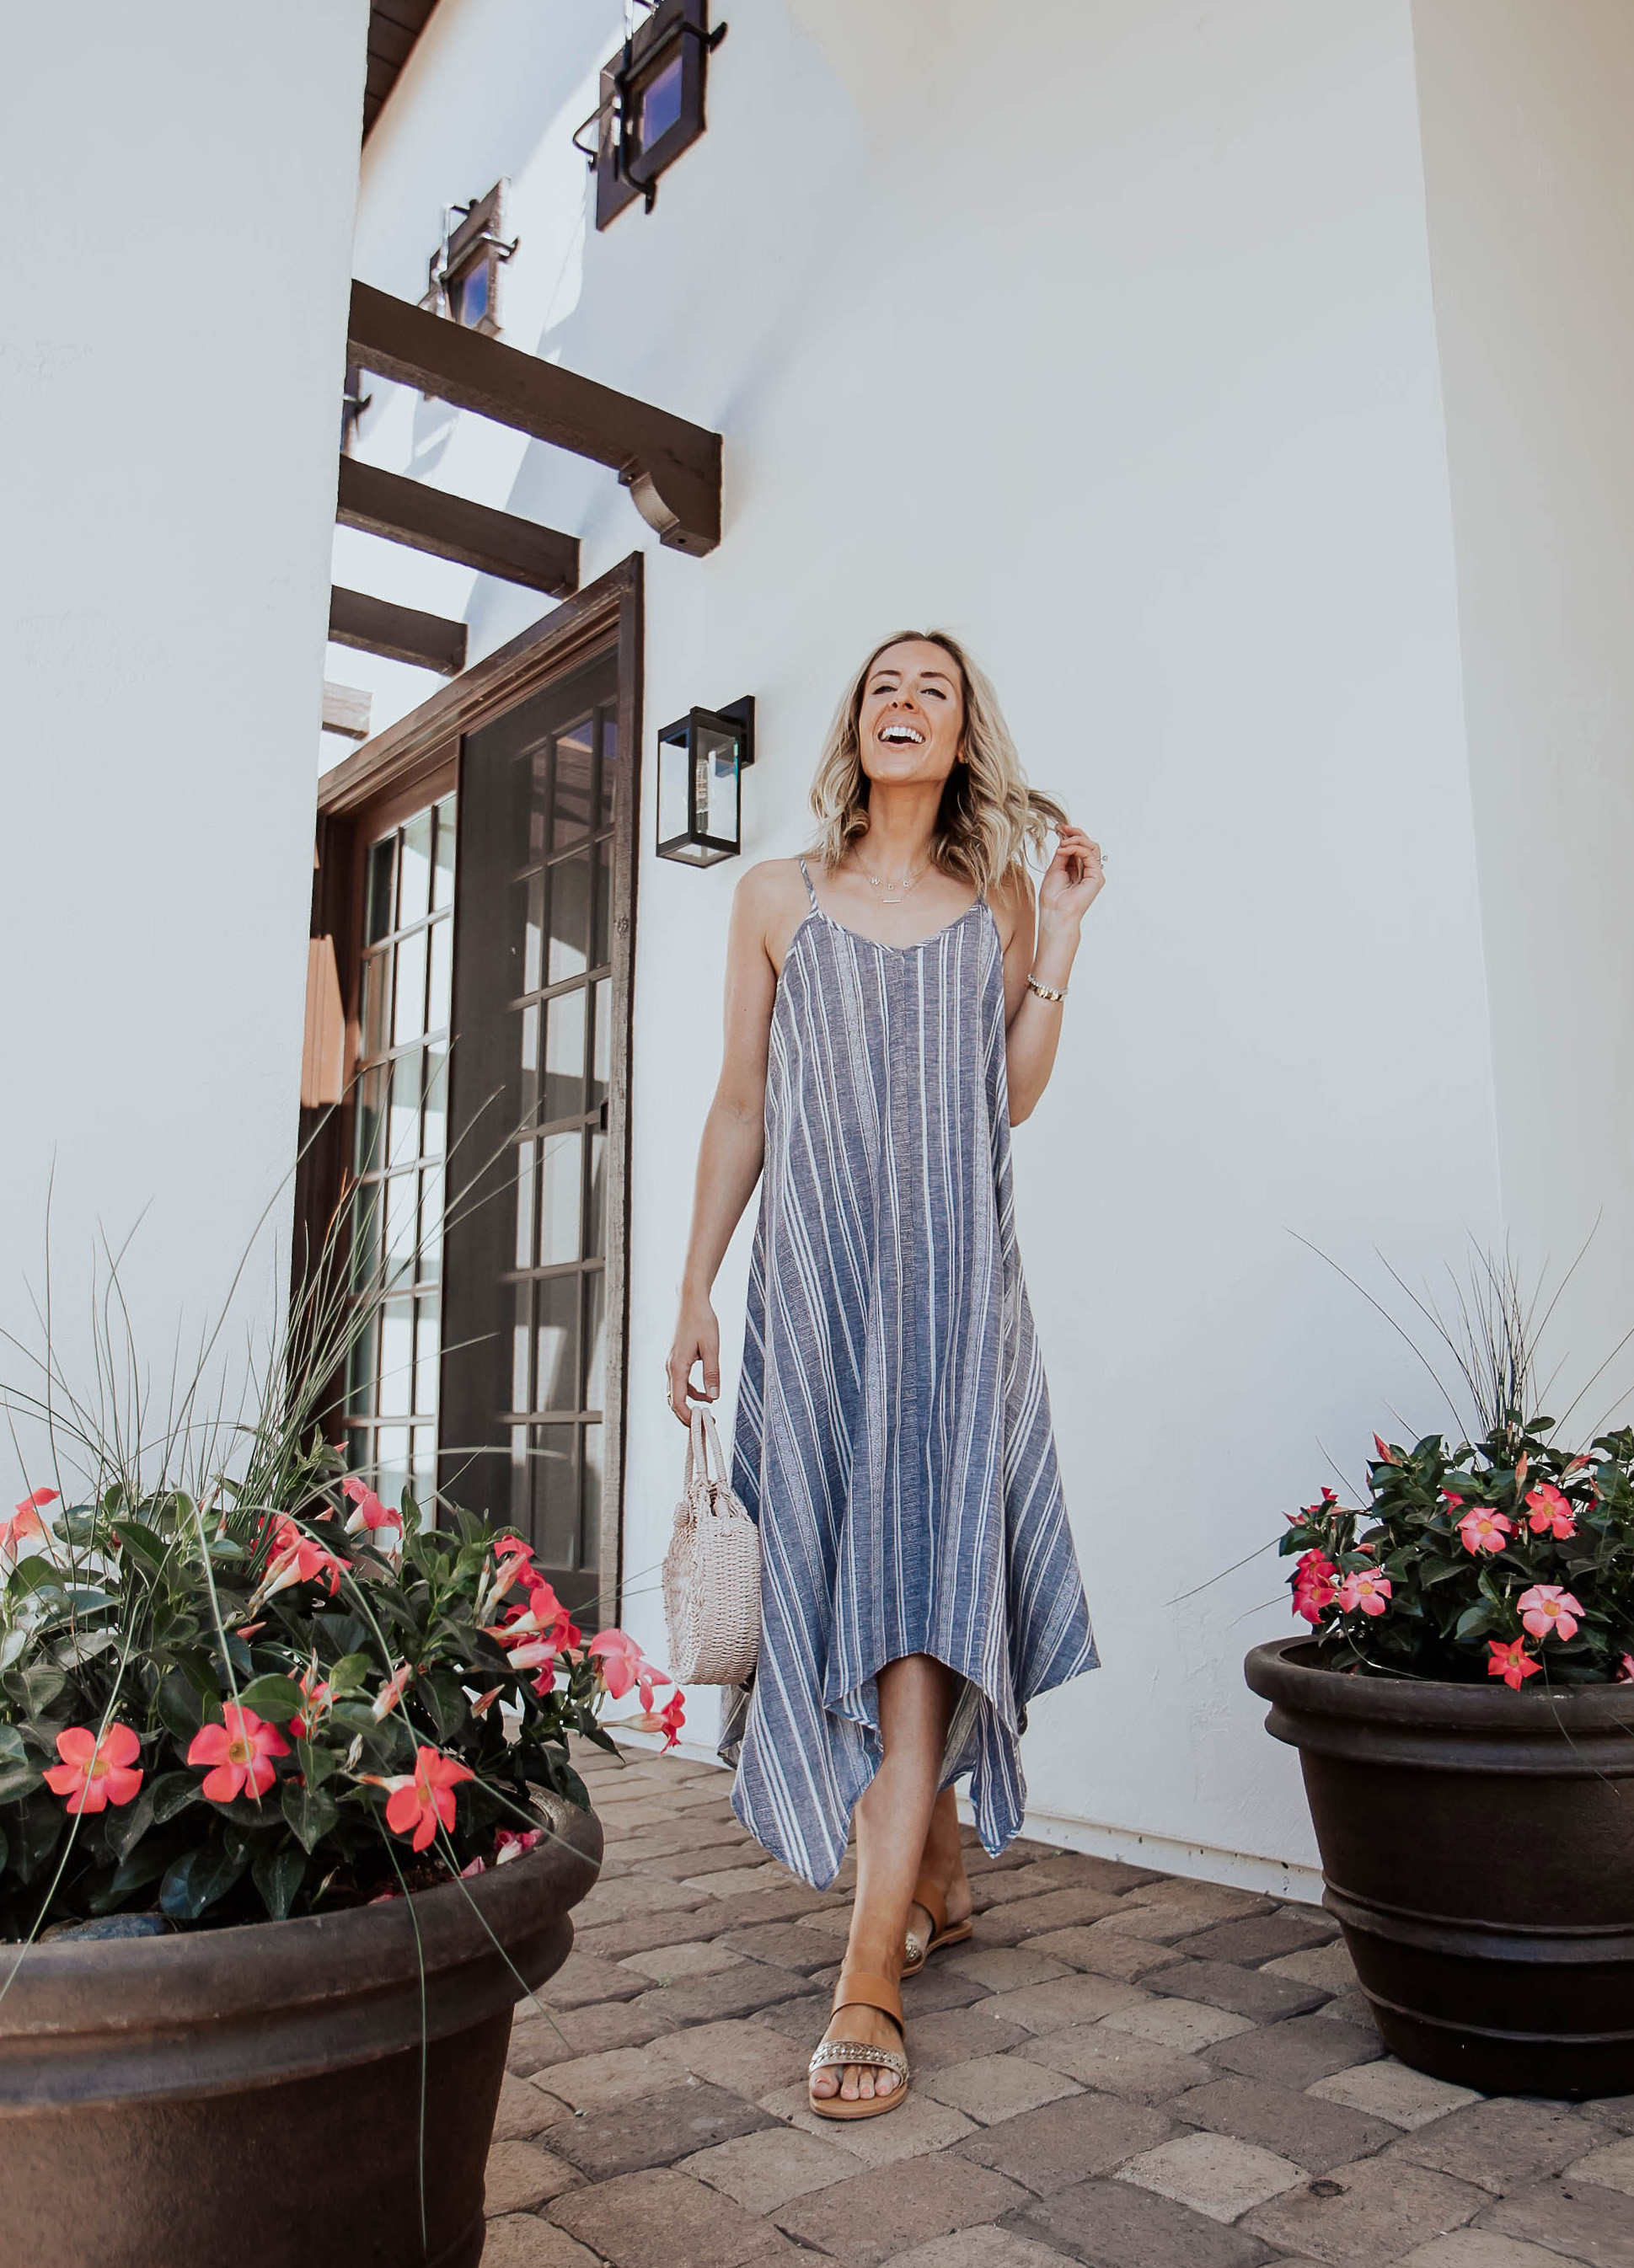 Reno, Nevada Blogger, Emily Farren Wieczorek of Two Peas in a Prada shares one of her favorite buys for summer - this $17 Tank Dress from WalMart